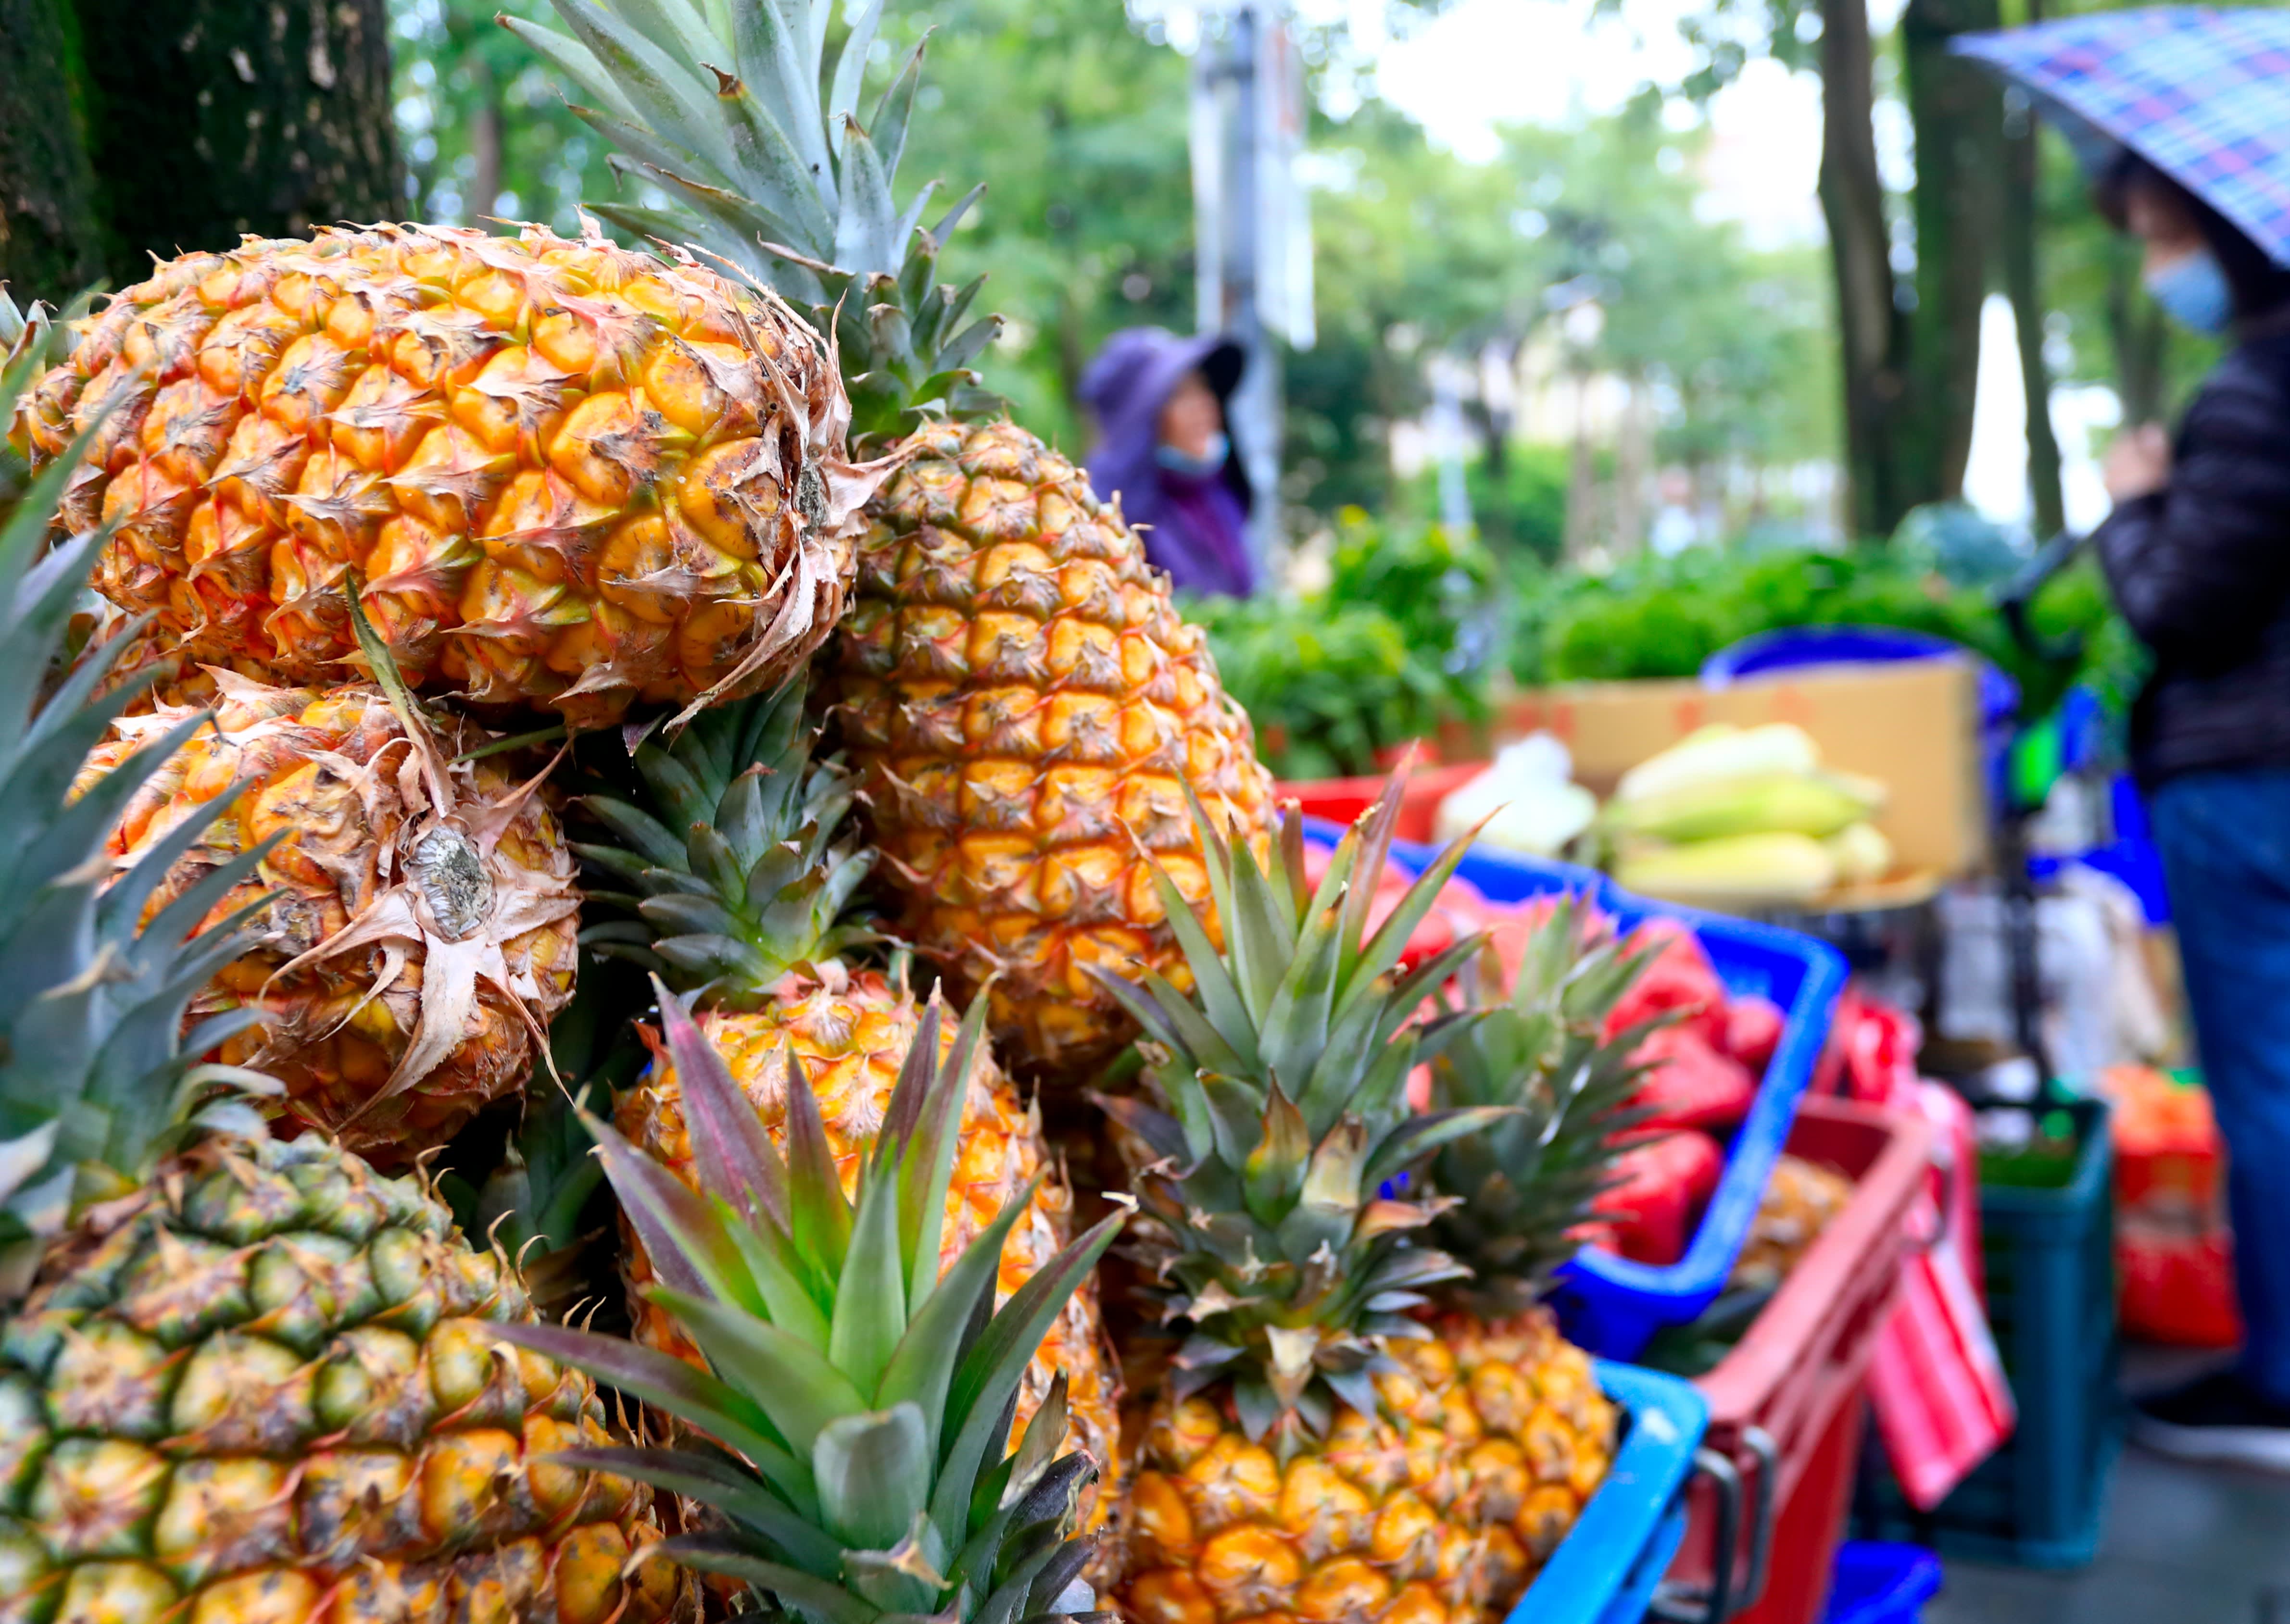 China’s ban on pineapples is inconsistent with global trade rules